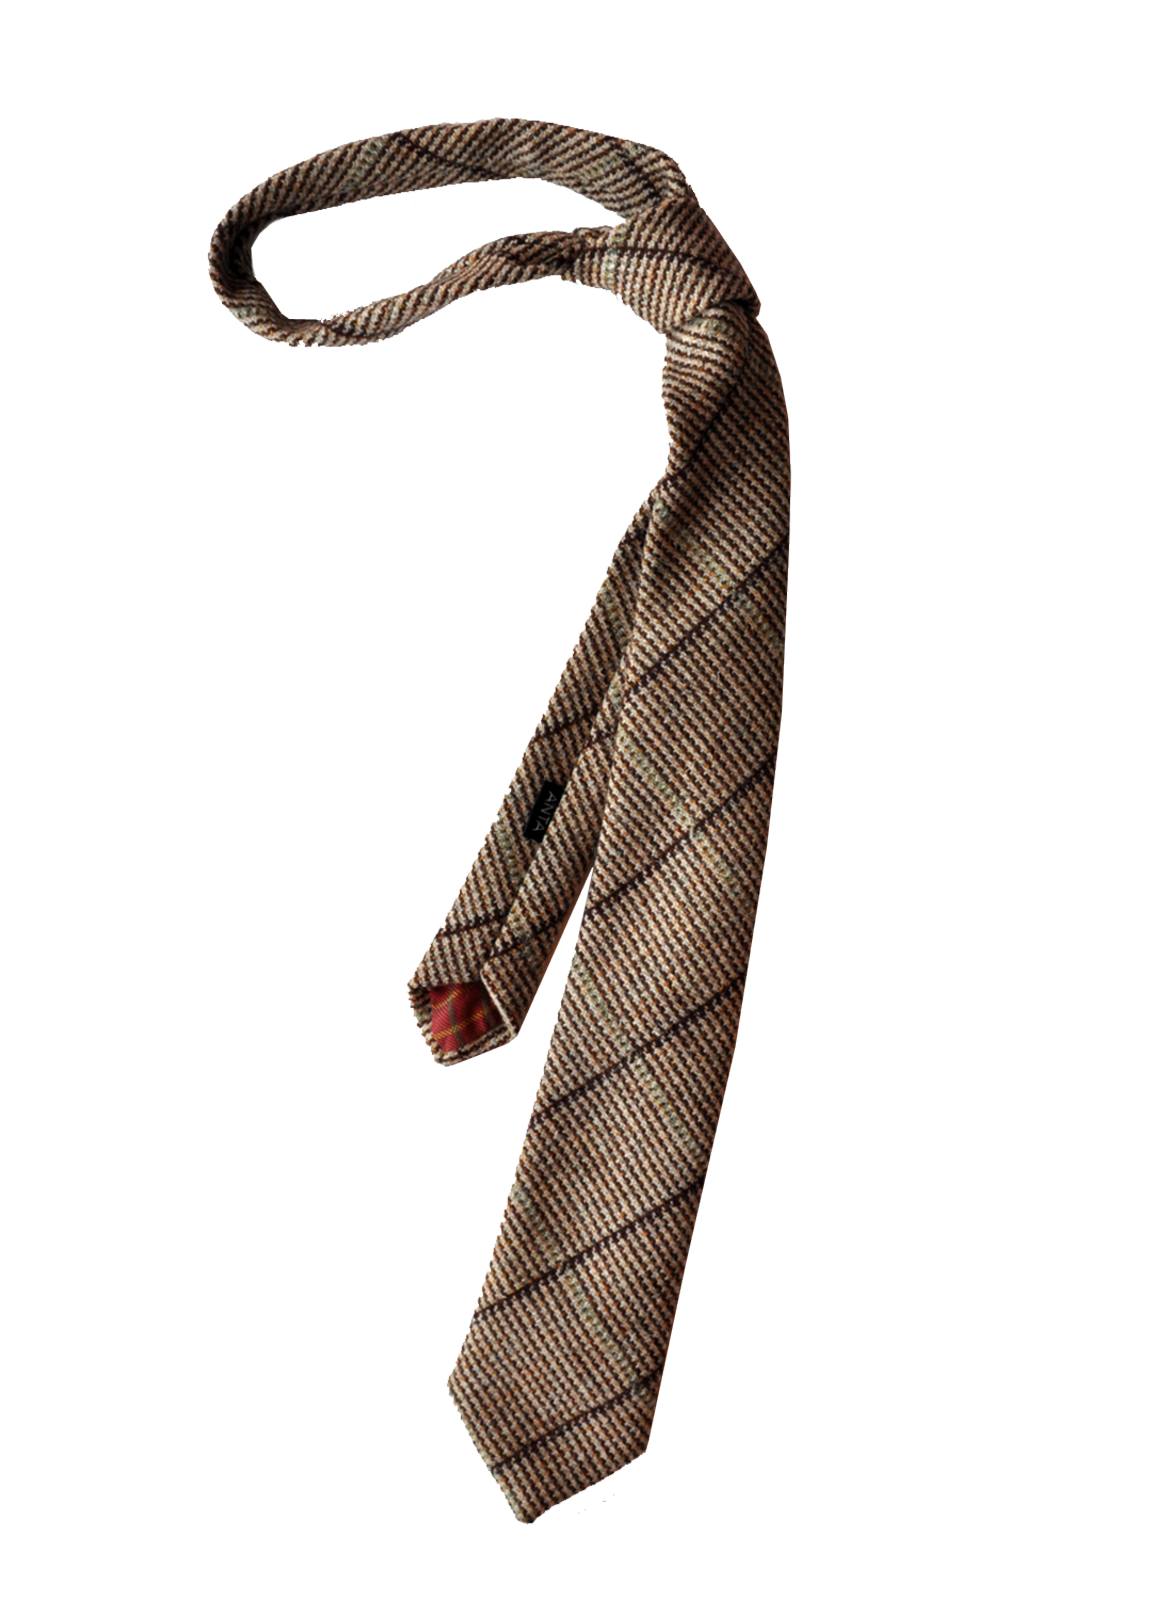 Tie Png File PNG Image